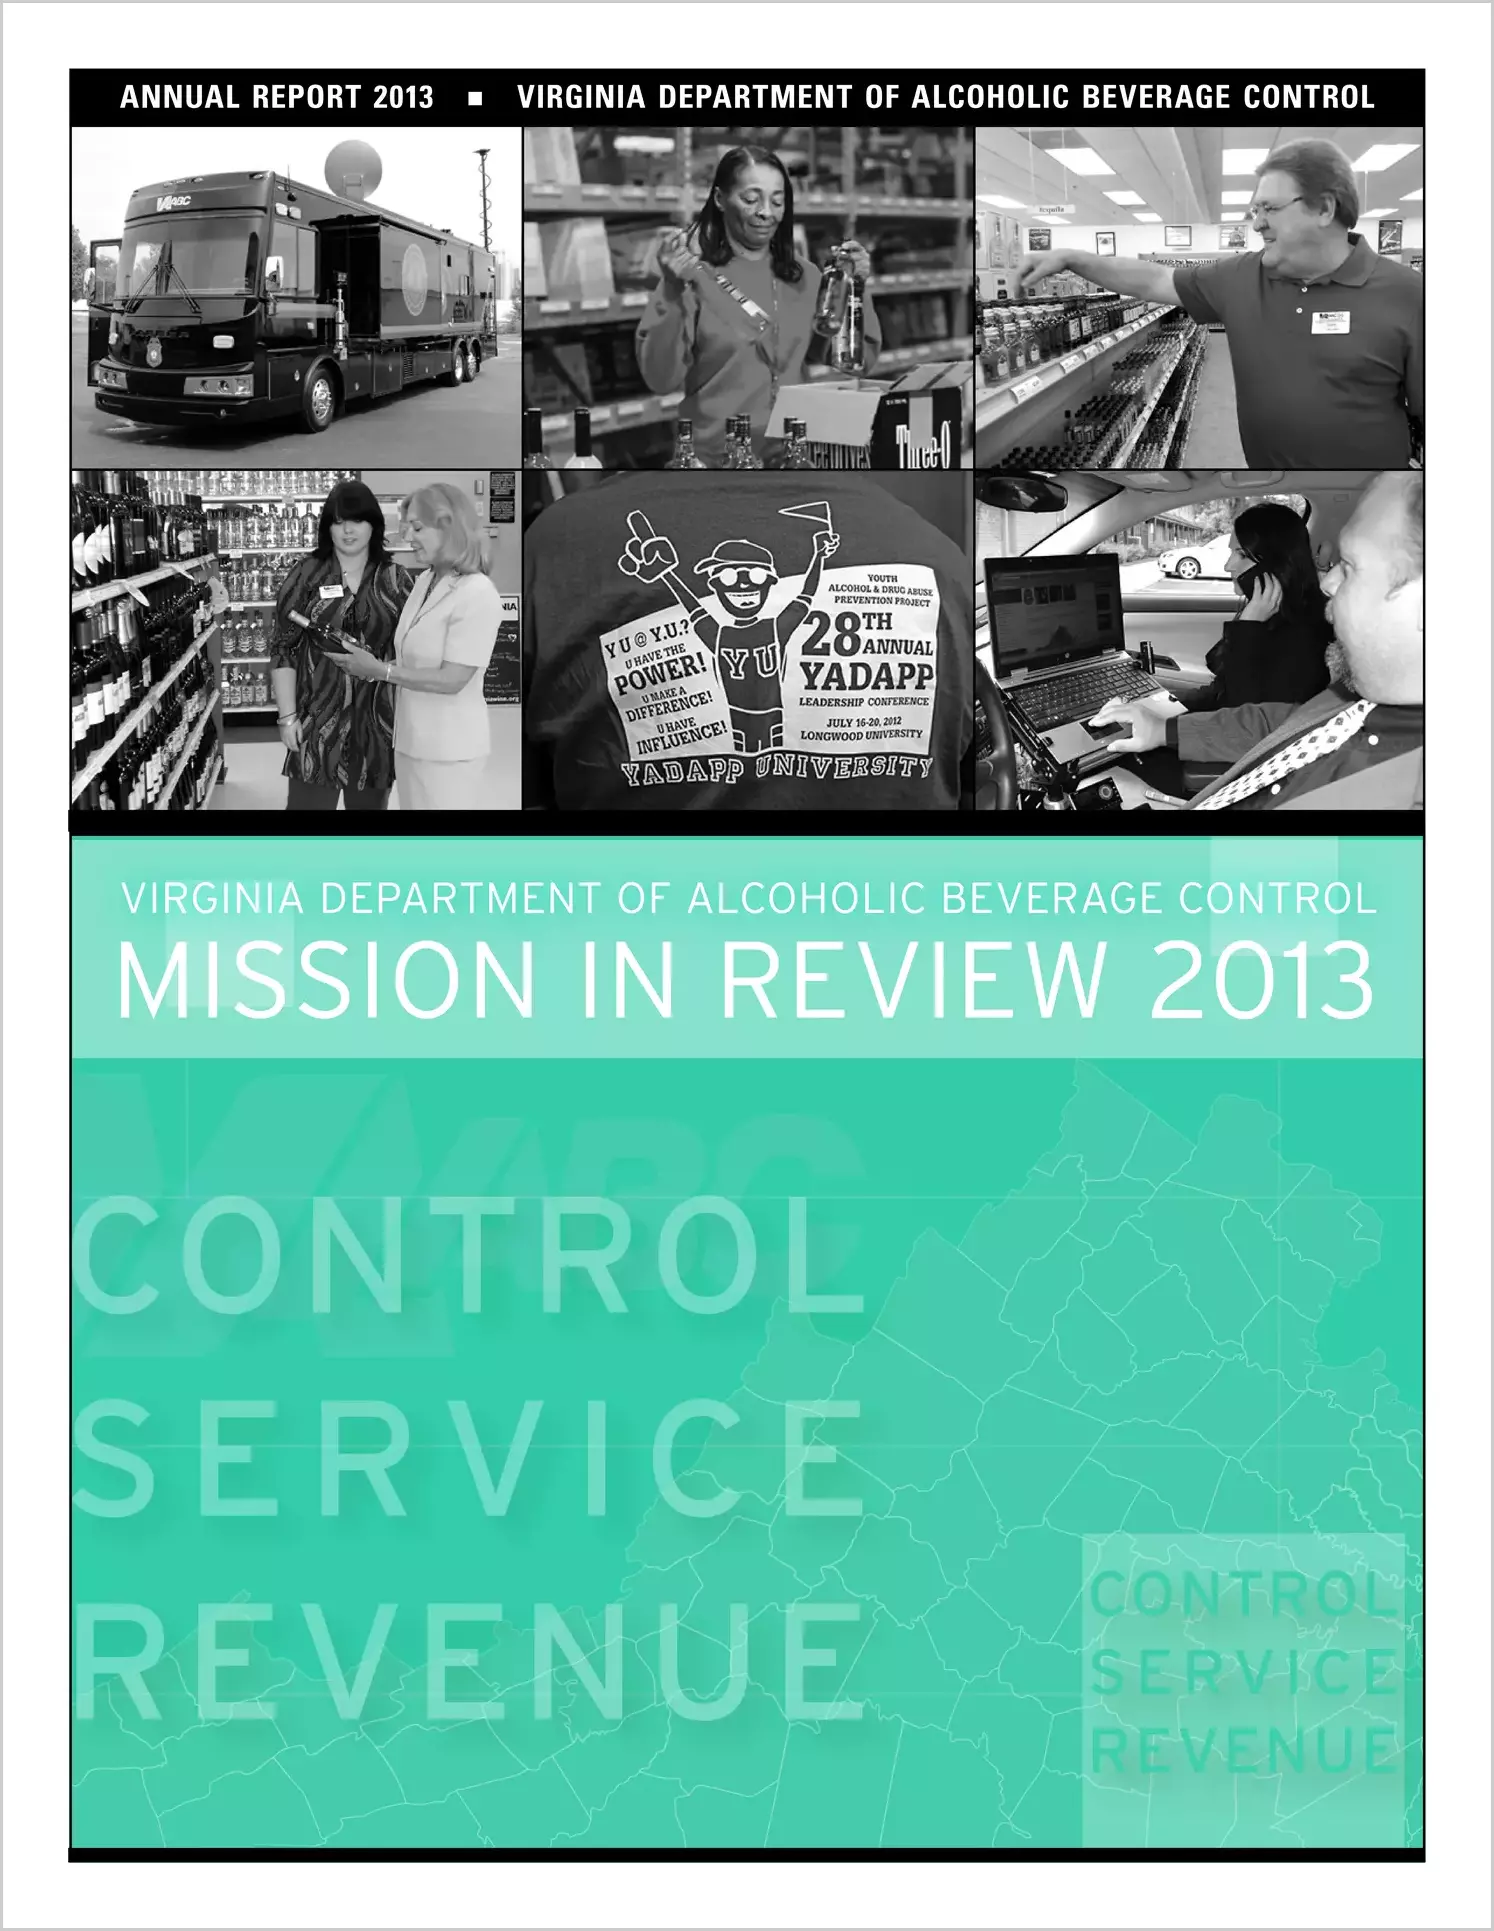 Department of Alcoholic Beverage Control Annual Report for Fiscal year 2013